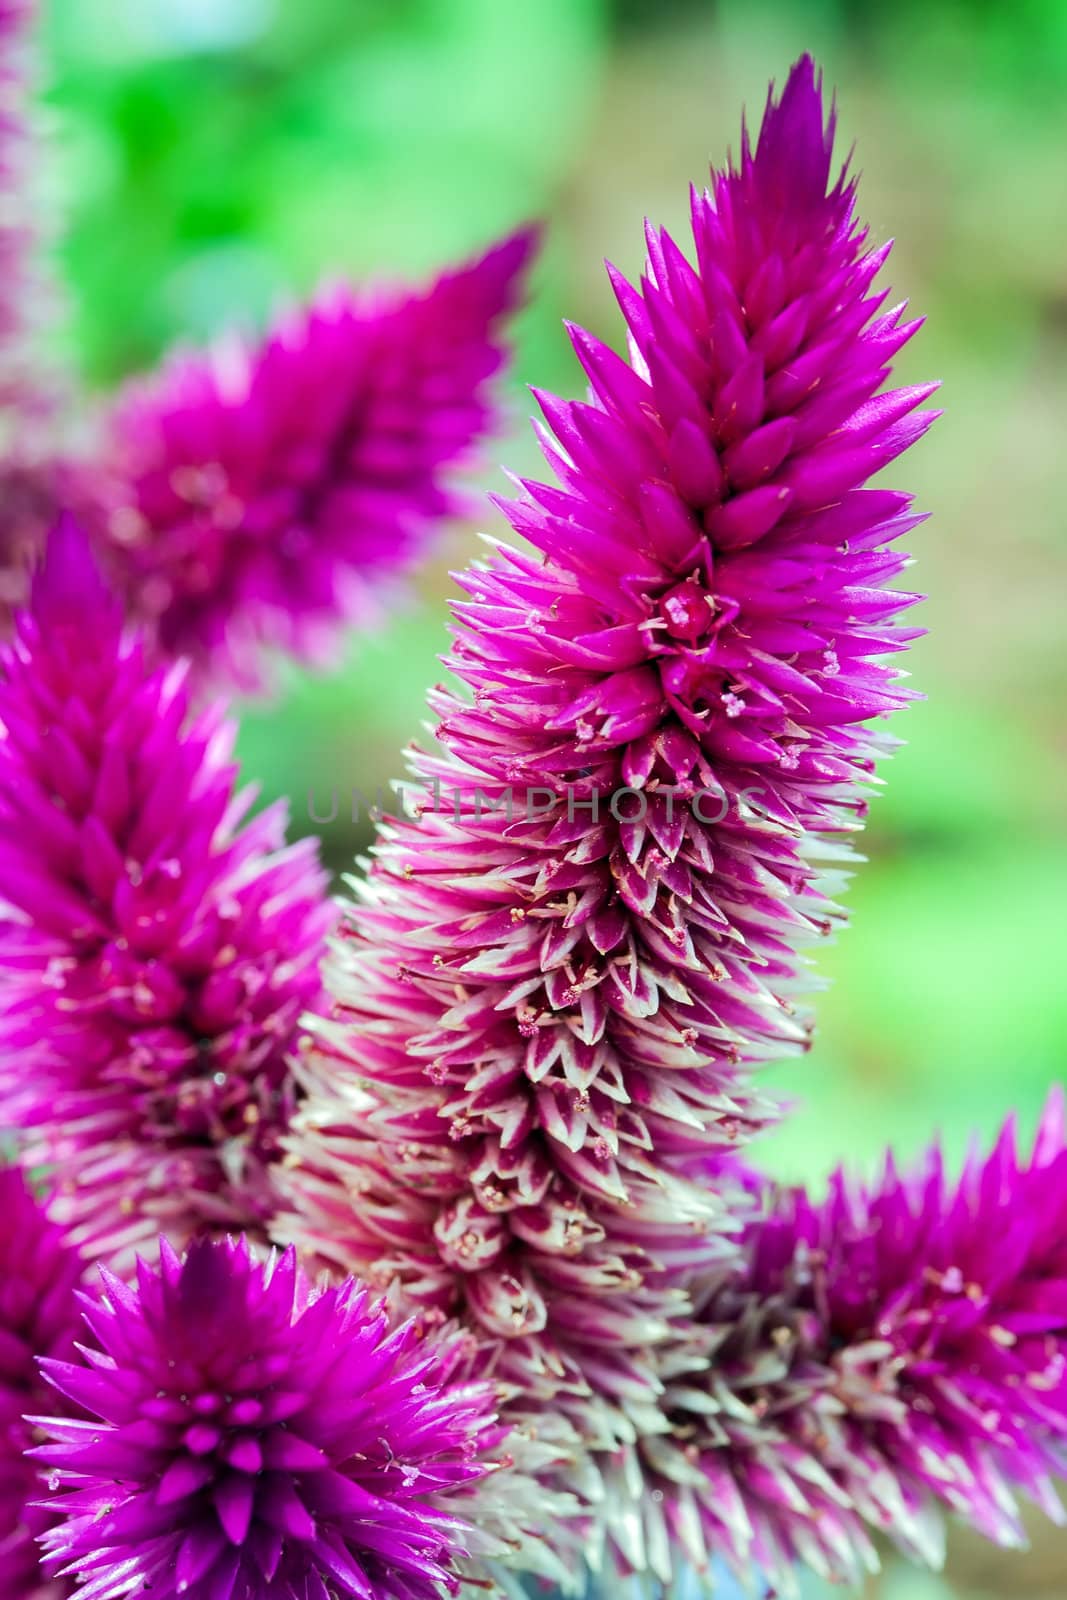 Celosia argentea also known as Plumed Cockscomb flowerbed